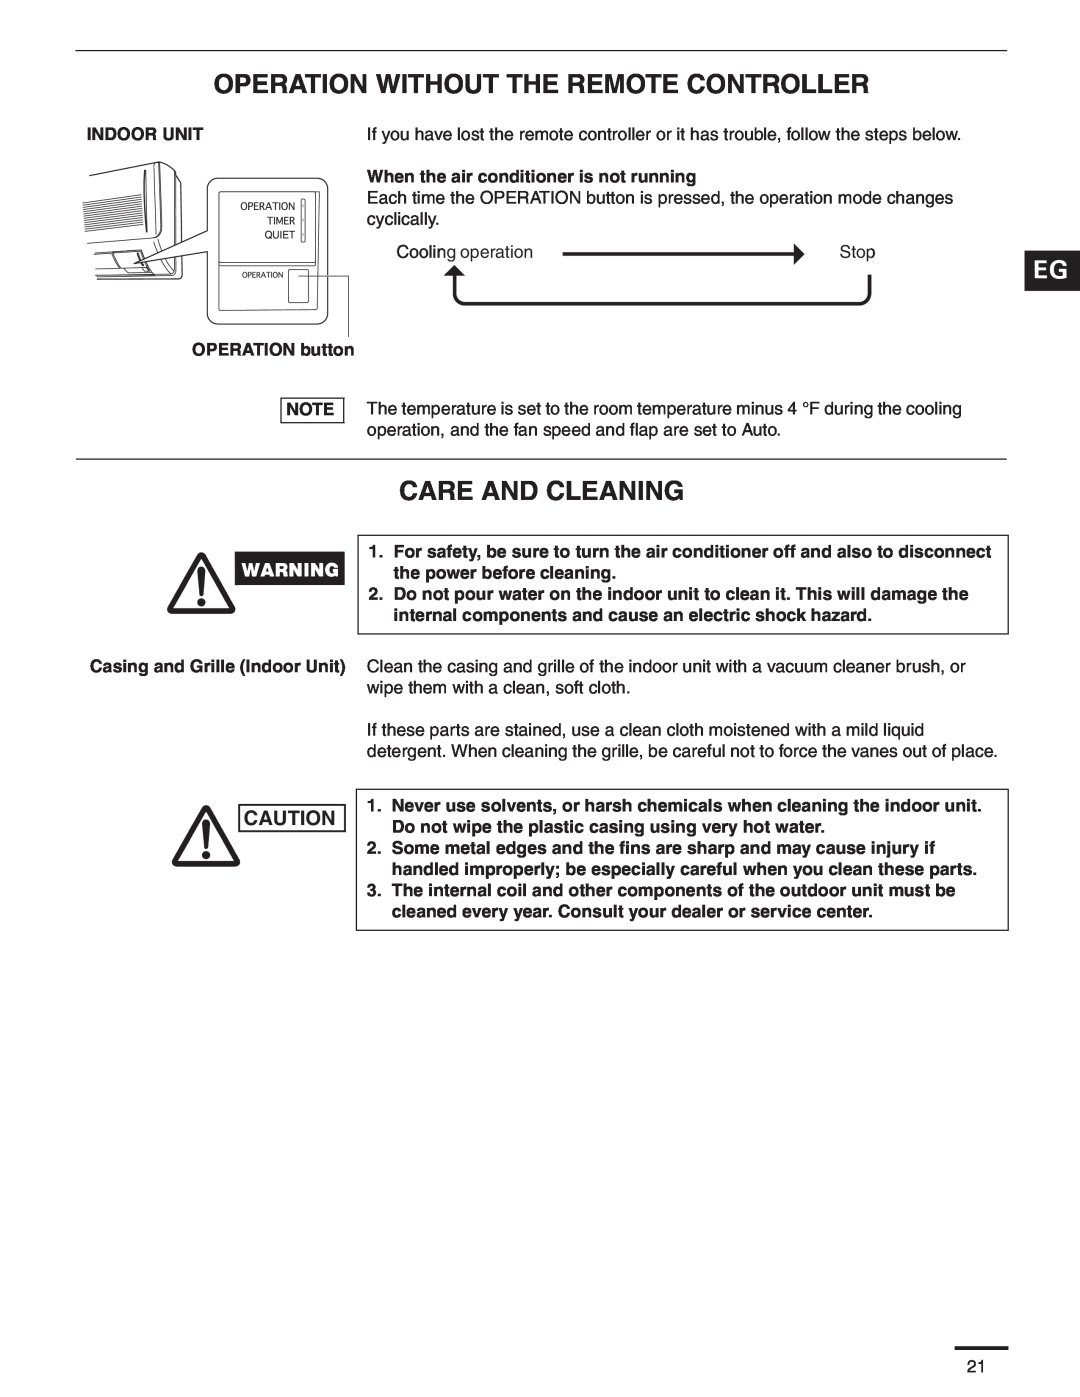 Panasonic CS-KS18NKU, CU-KS18NKU service manual Operation Without The Remote Controller, Care And Cleaning 